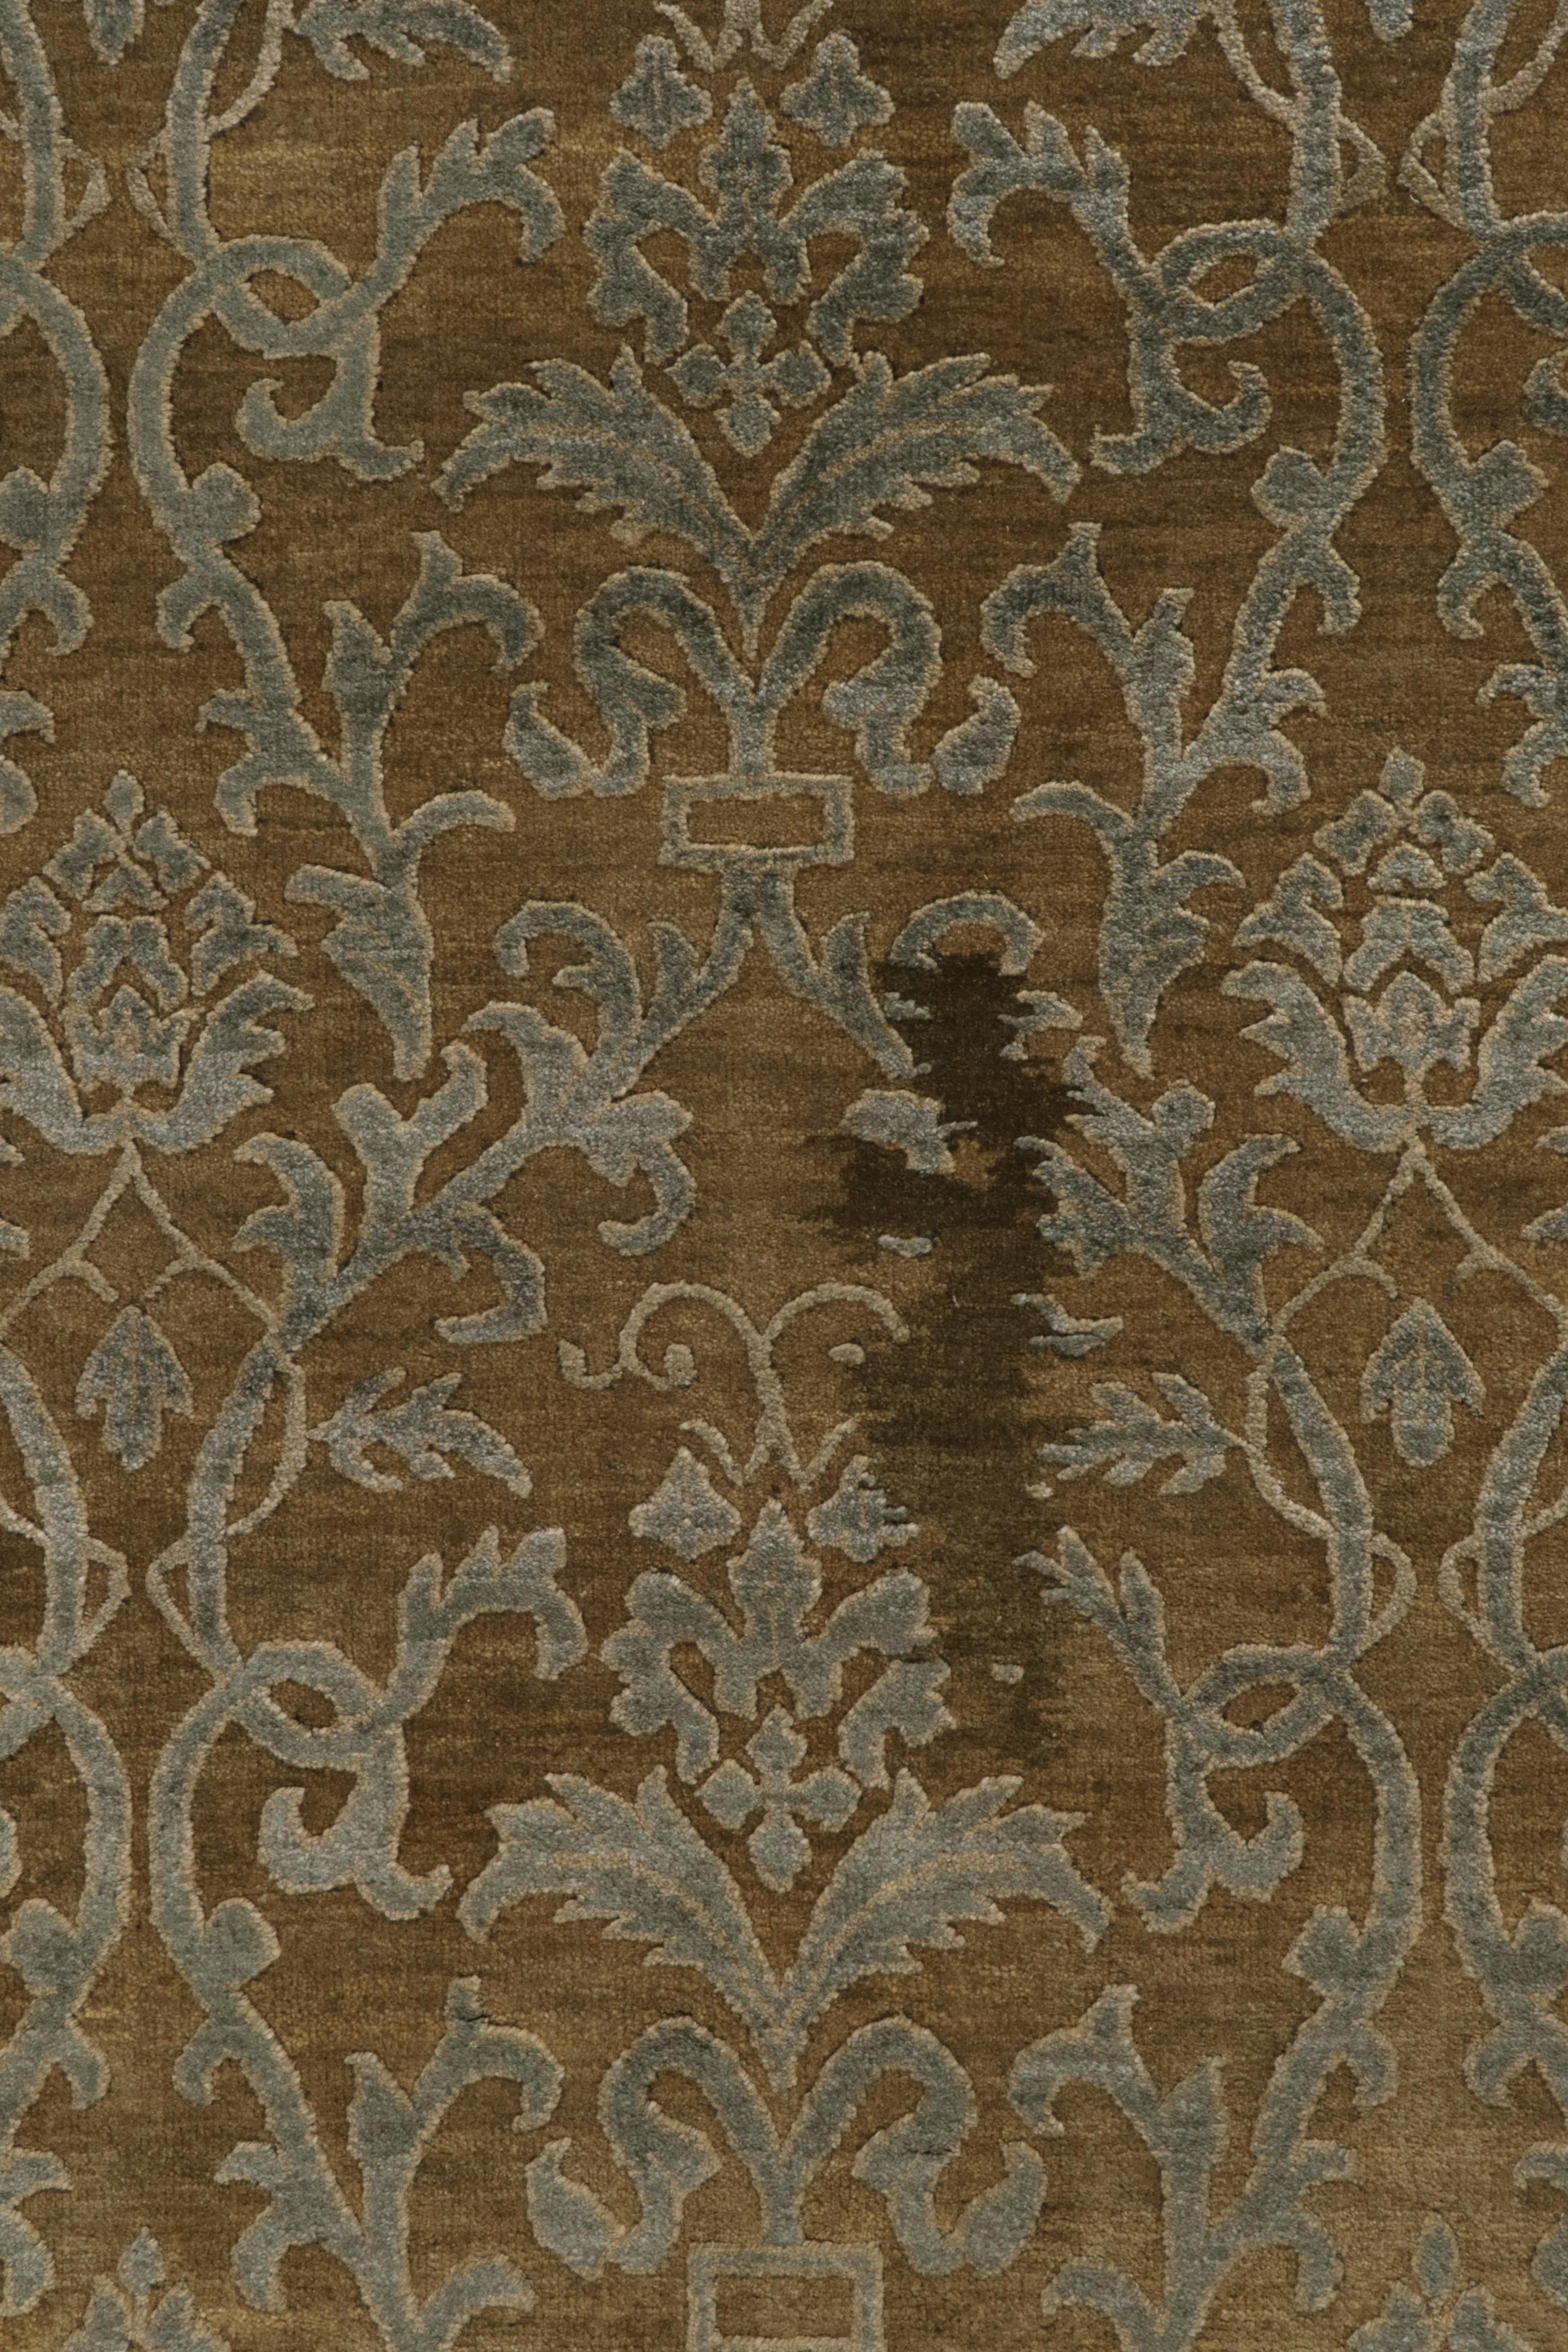 Silk Rug & Kilim’s European style Contemporary rug in Beige-Brown with Blue Floral Pa For Sale